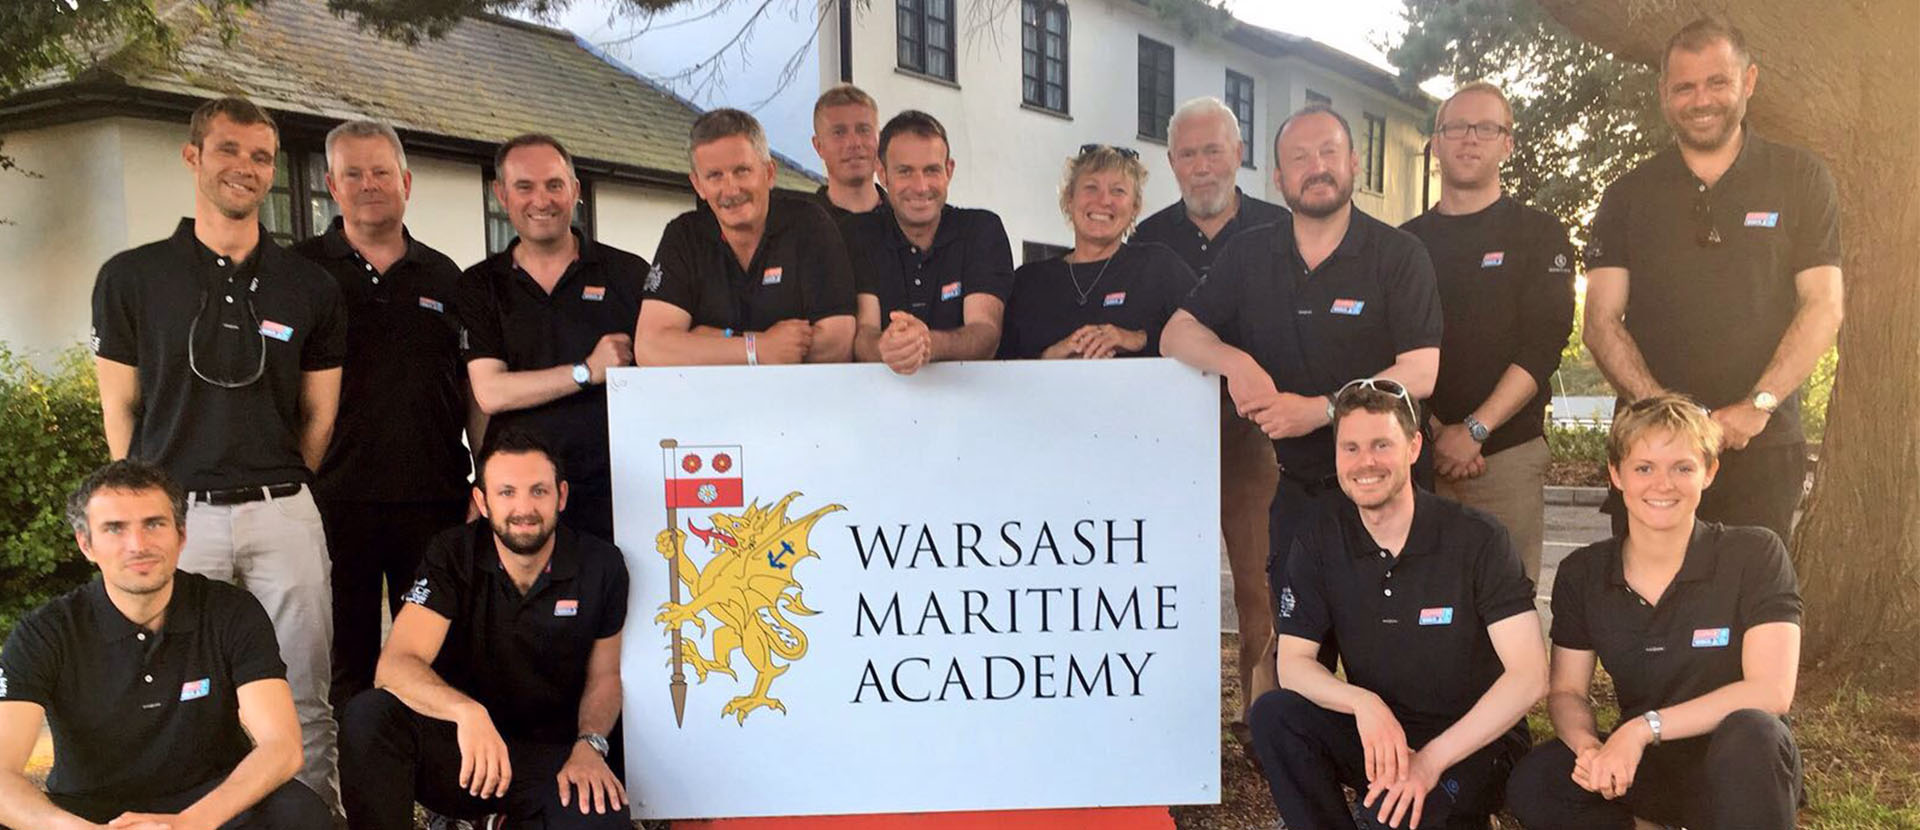 Skippers around the Warsash Maritime Acdemy sign